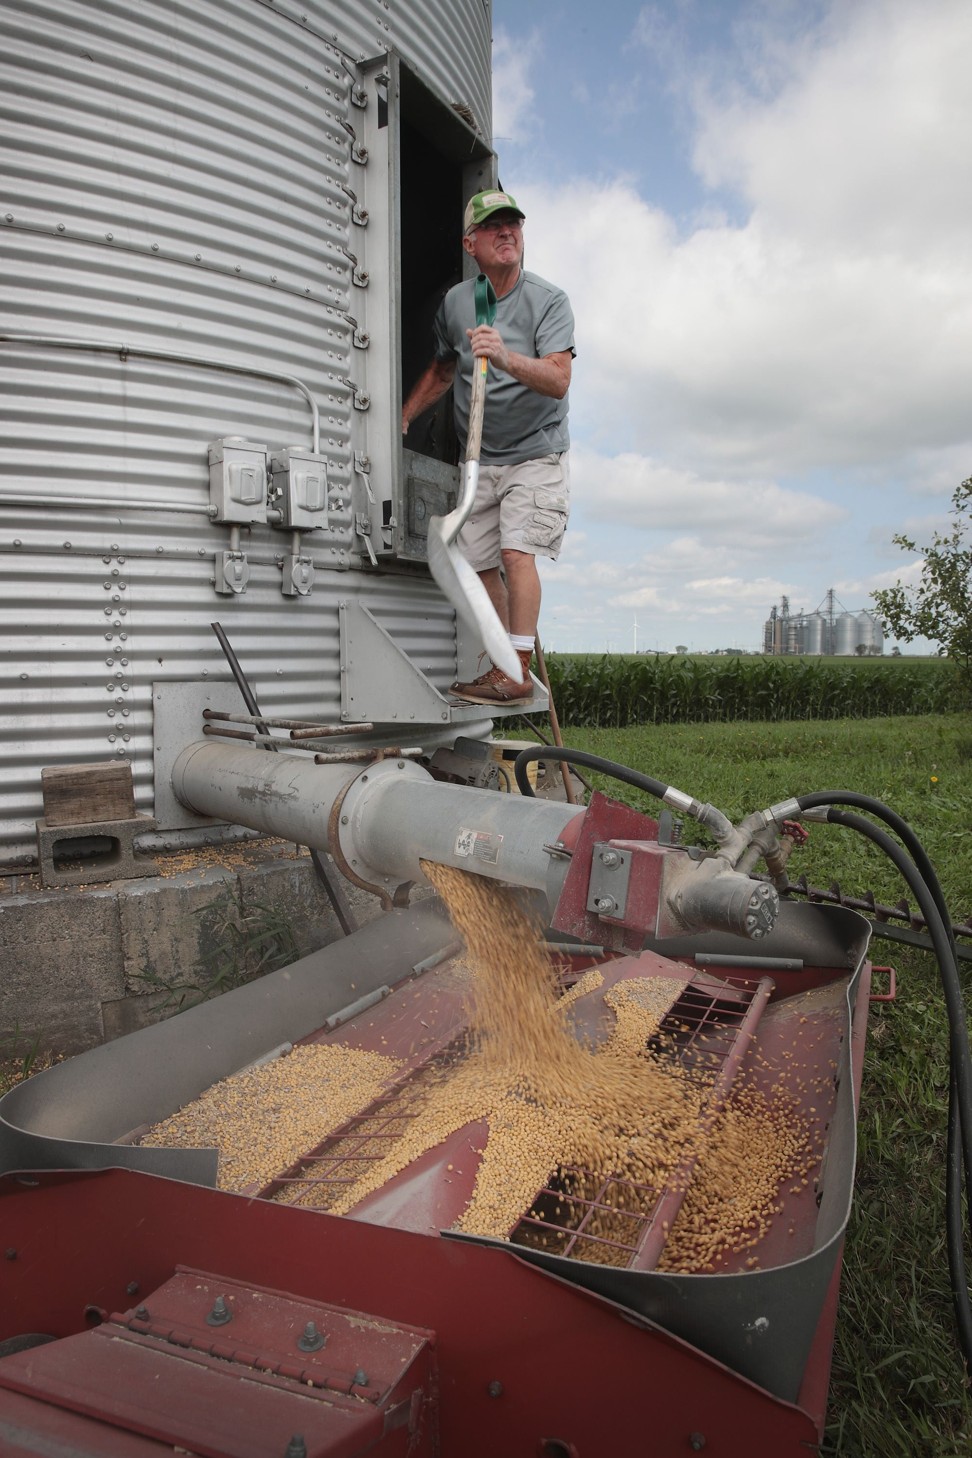 US soybean farmers have been caught in the crossfire of tariffs between Beijing and Washington. Photo: AFP